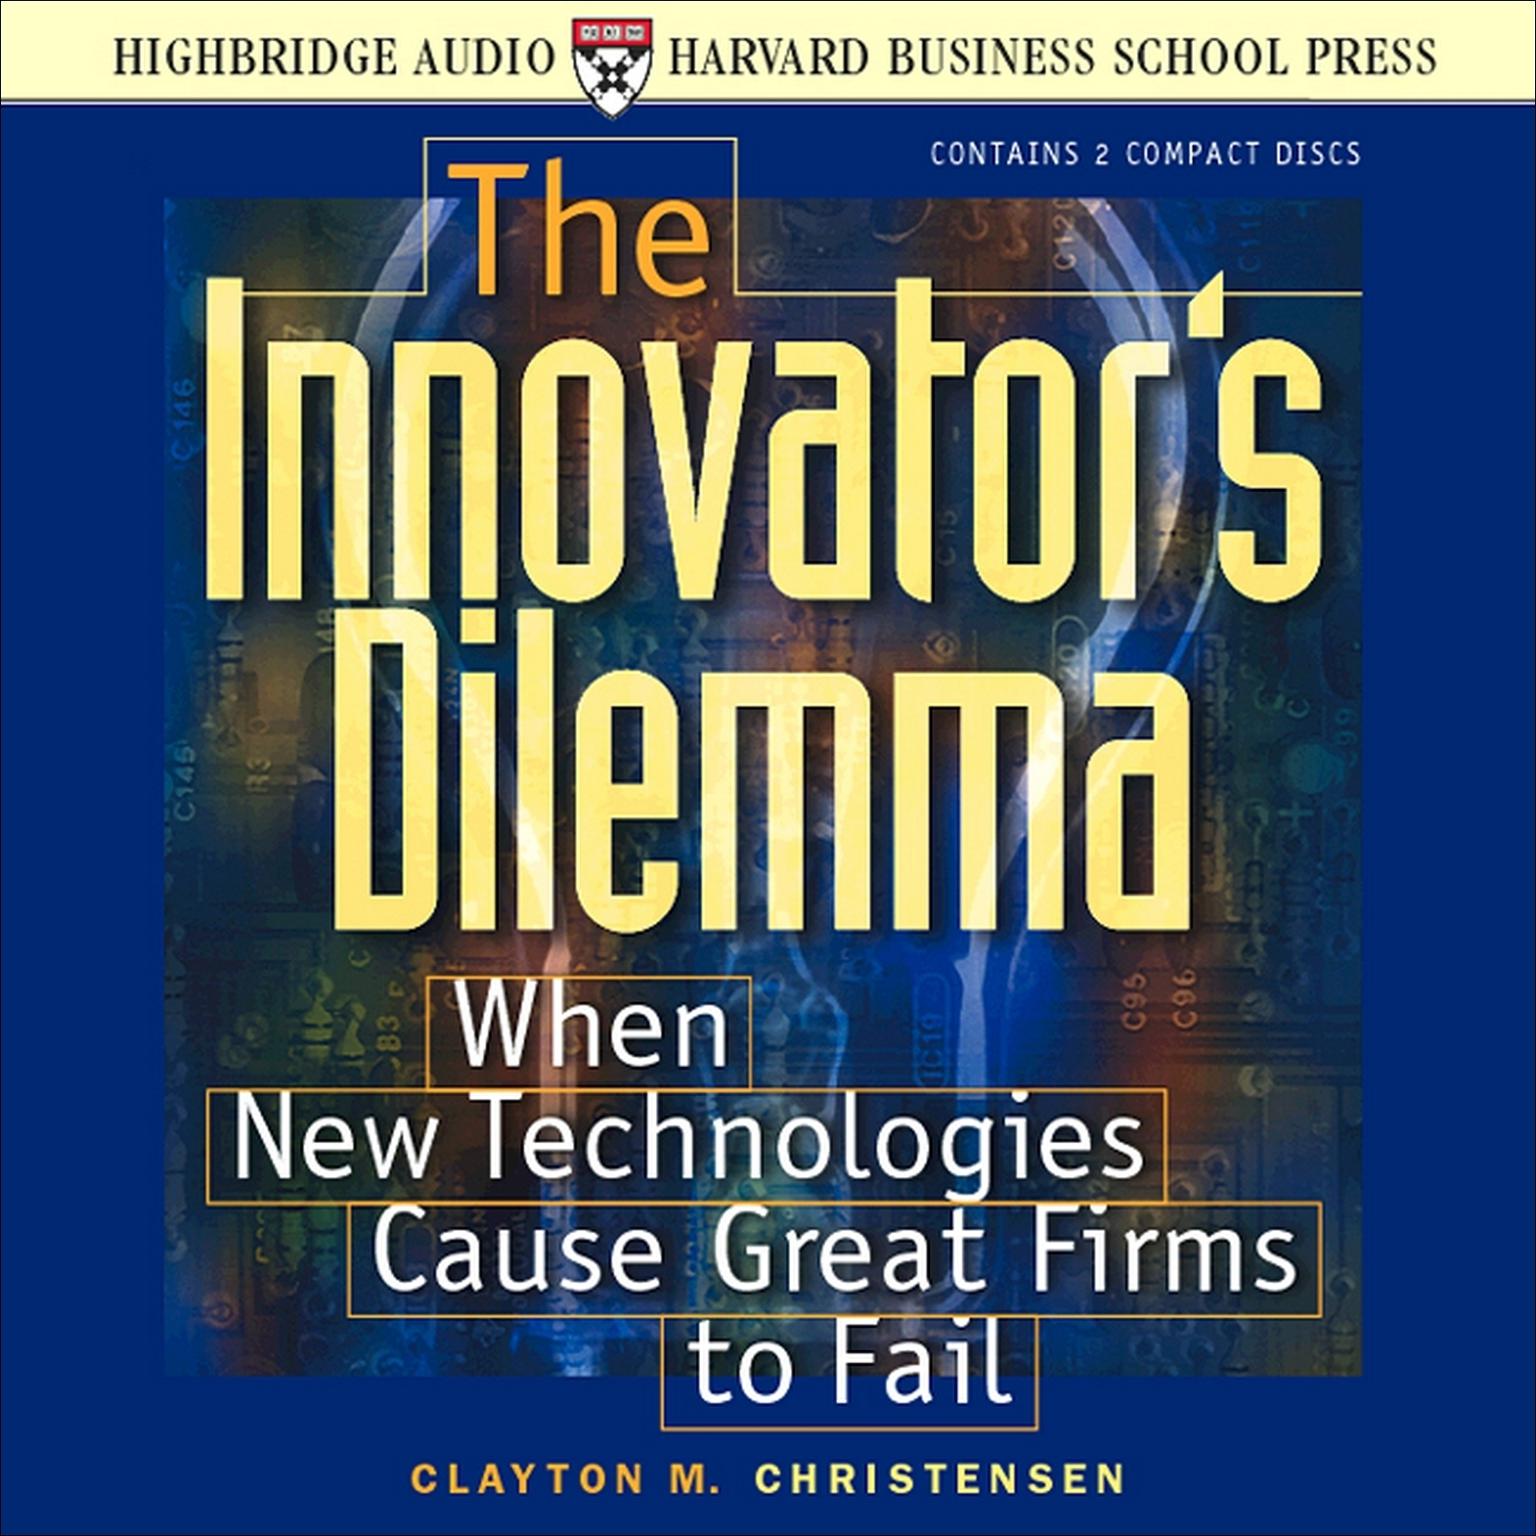 The Innovators Dilemma (Abridged): When New Technologies Cause Great Firms to Fail Audiobook, by Clayton M. Christensen